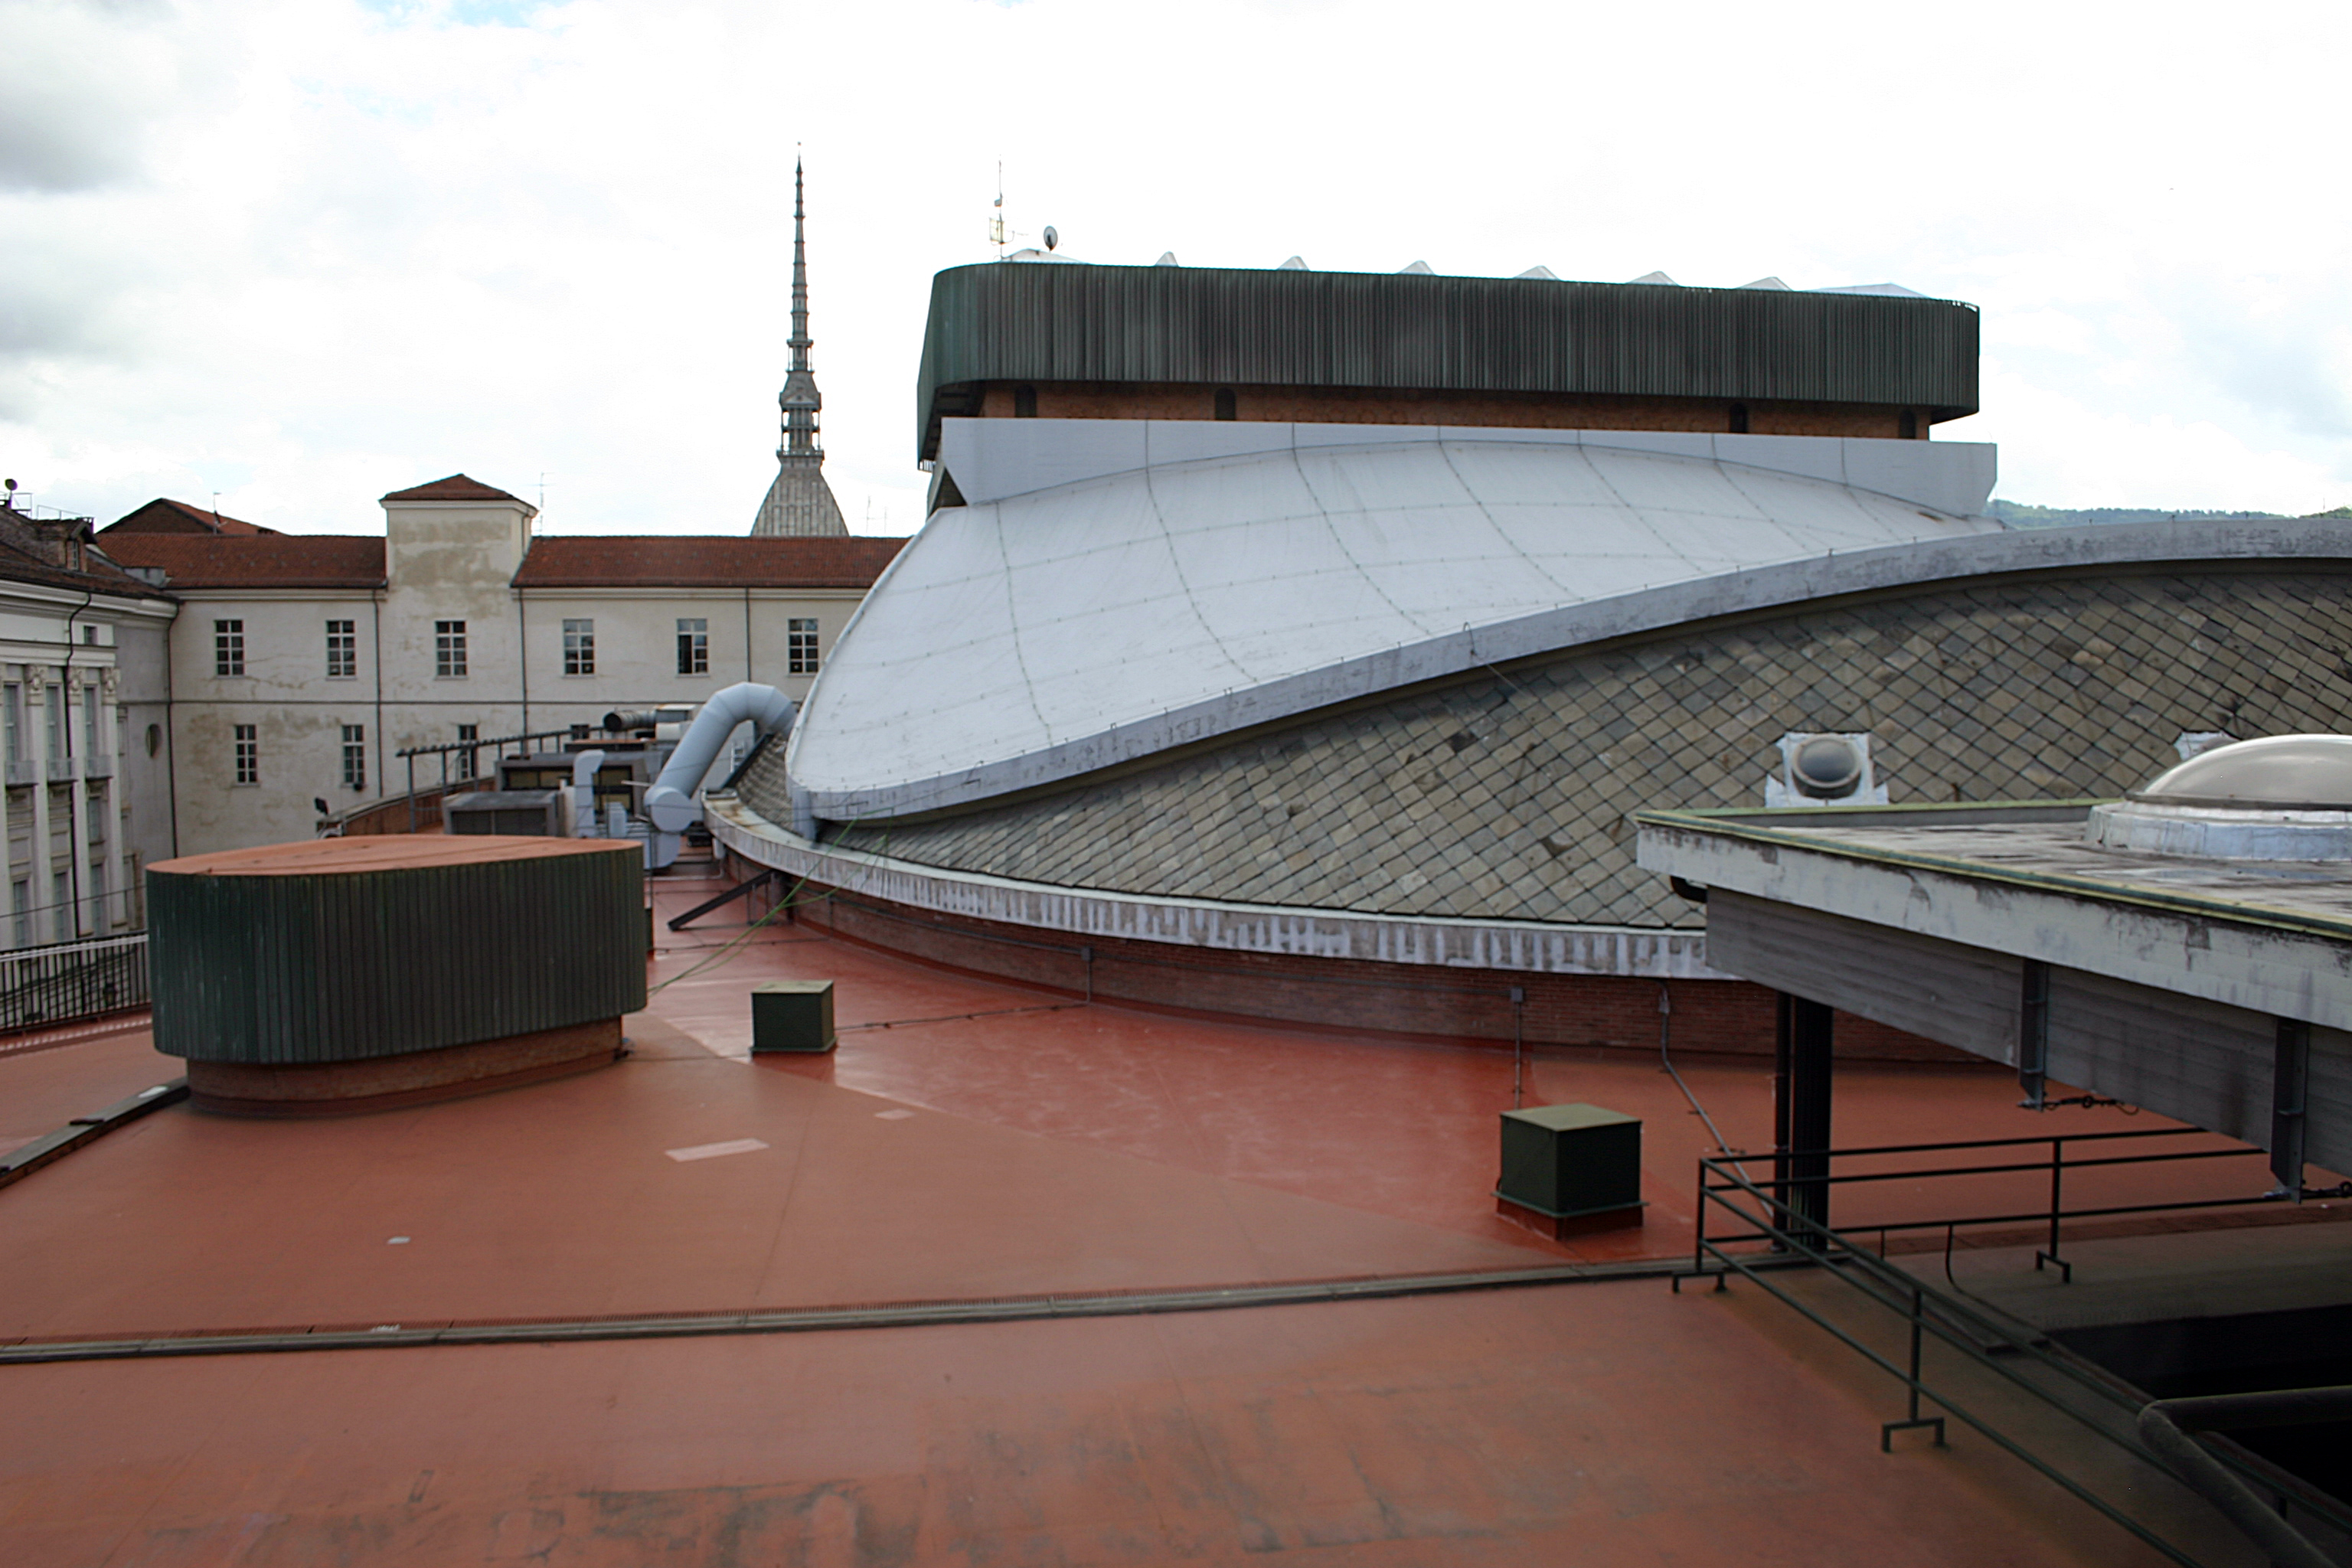 The terrace of the Teatro Regio with its typical cover with a hyperbolic paraboloid shape, with the fly tower on the top